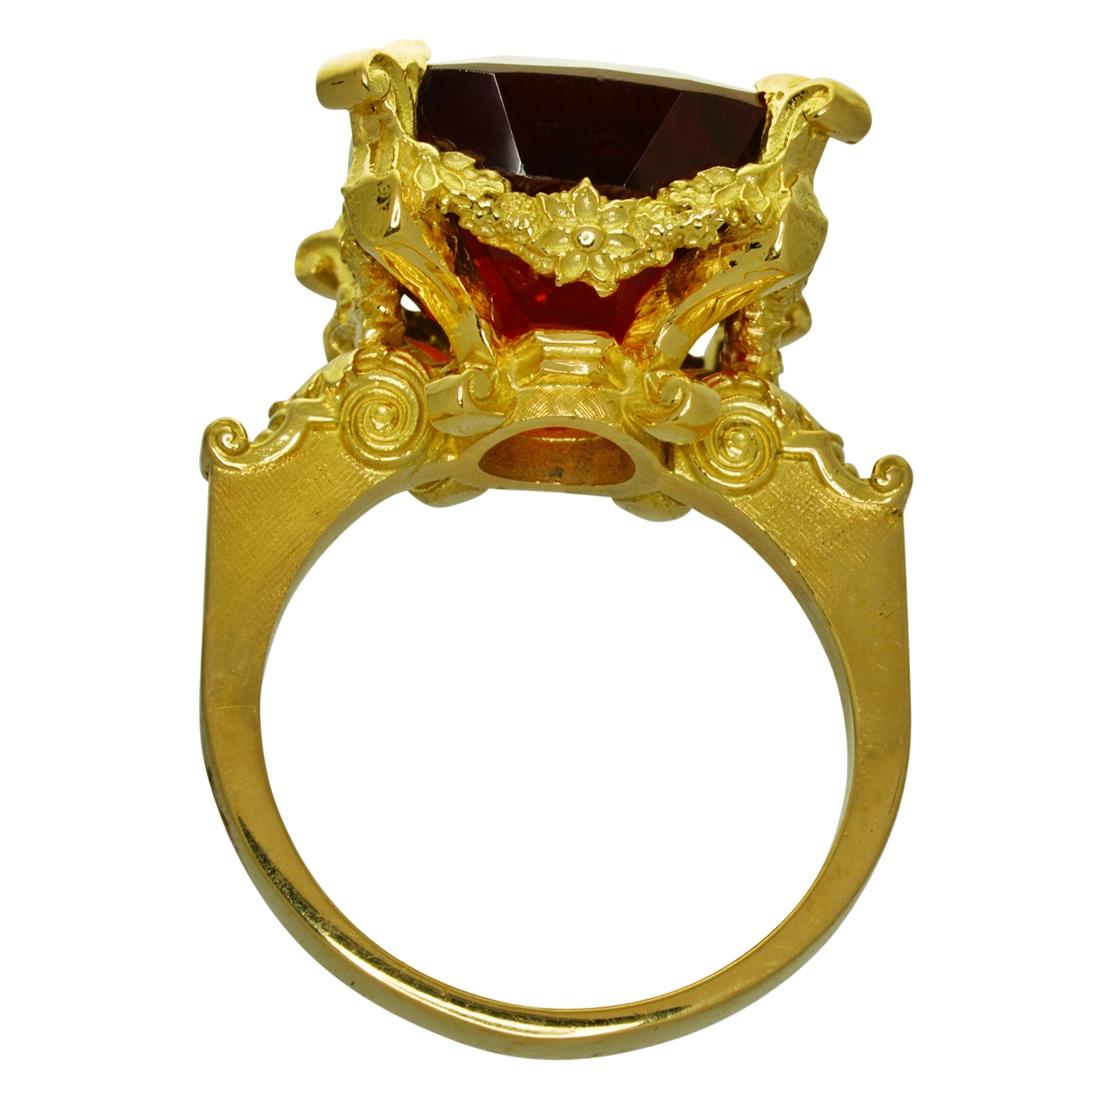 Dionysus and the Nymphs of Nysa Ring in 18kt Gold, Cushion Cut 20.98ct Garnet For Sale 8